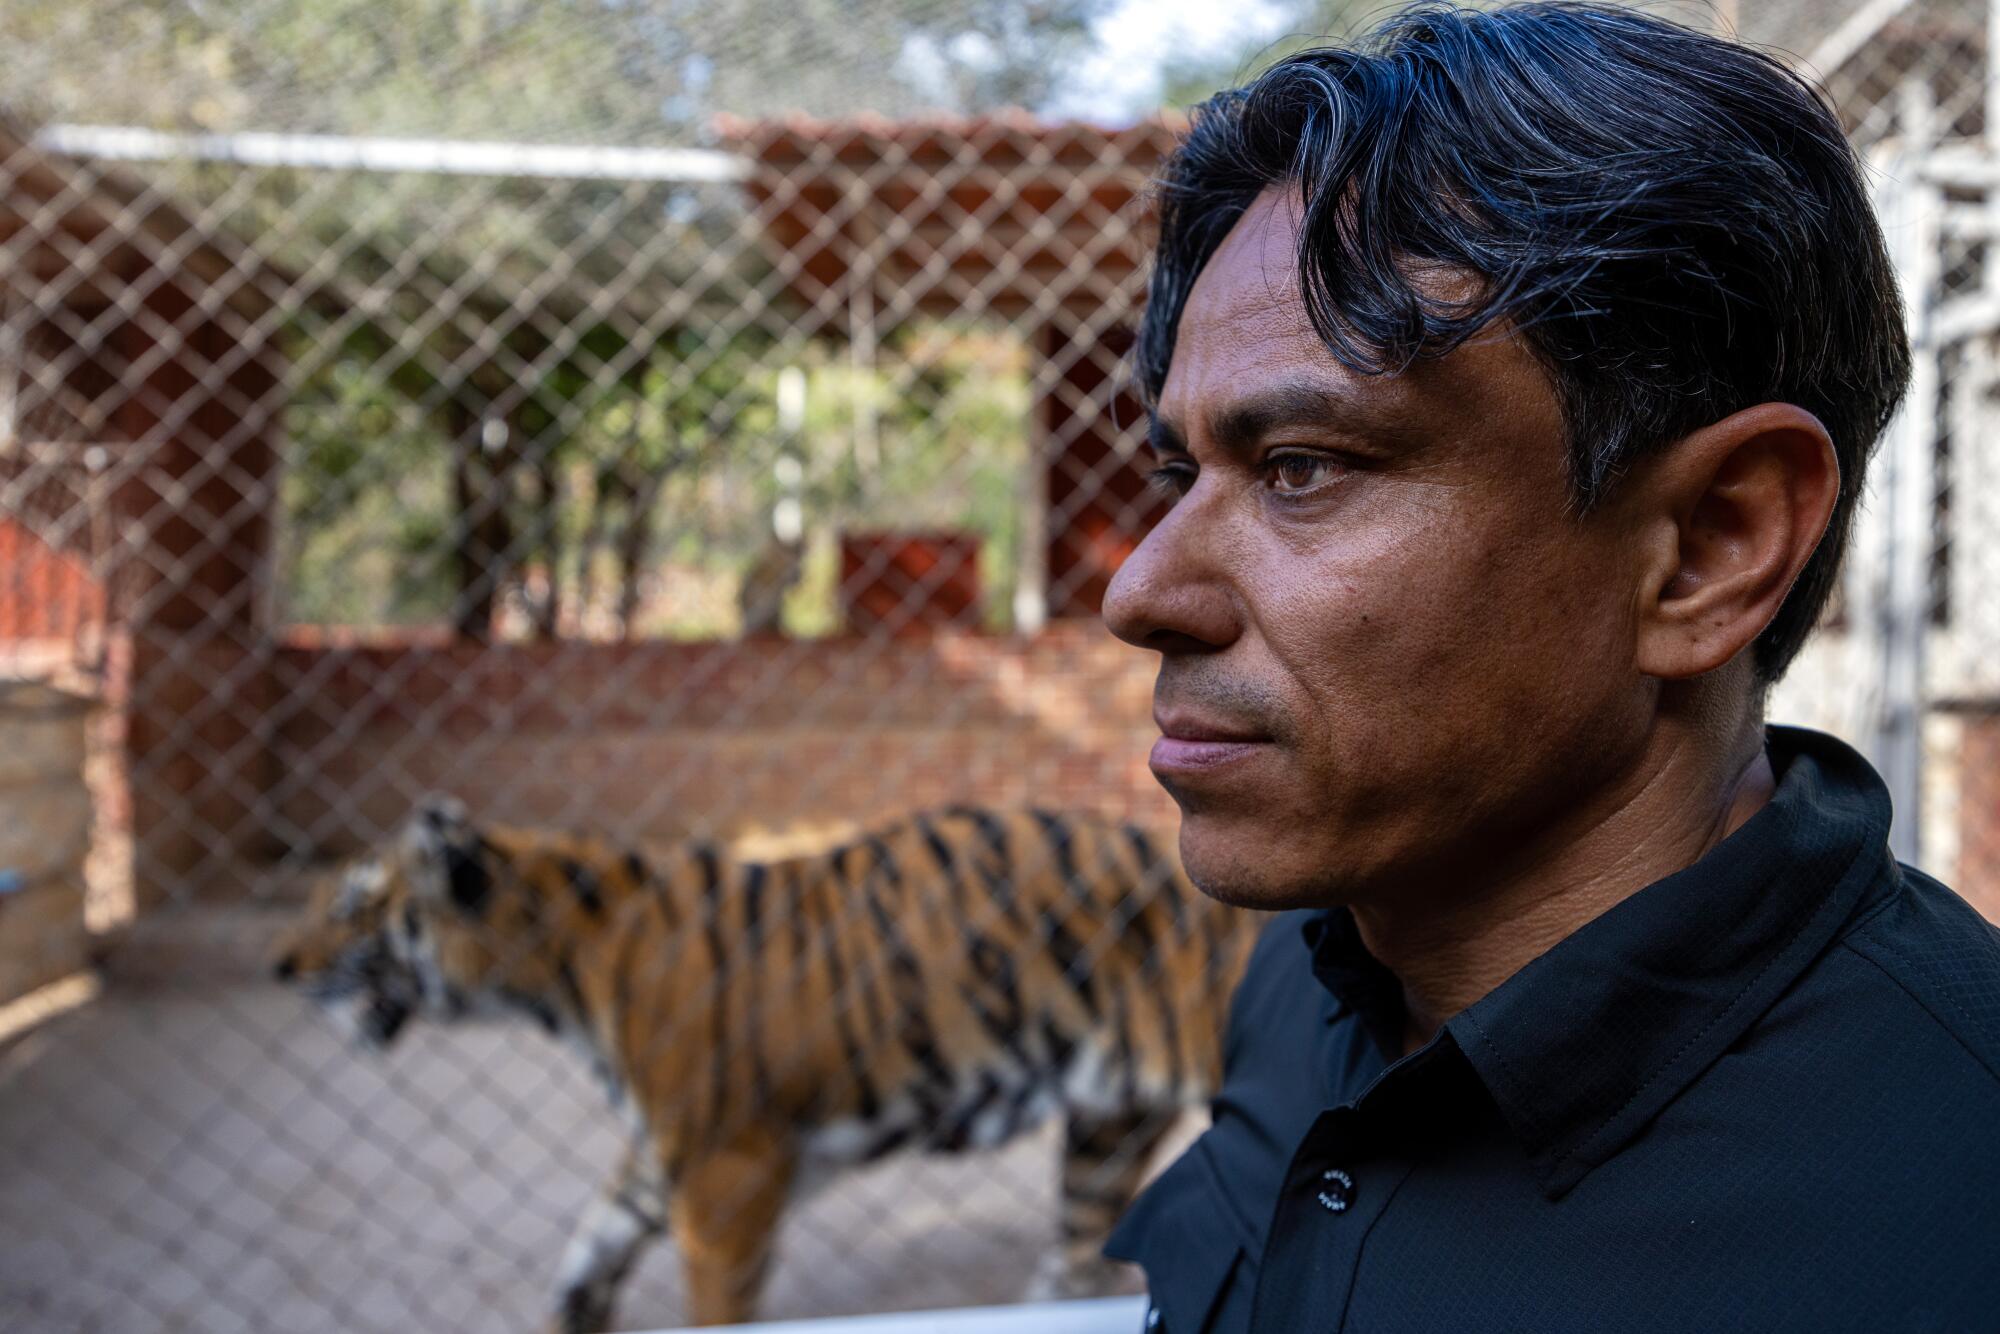 A man stands in profile as a tiger moves behind a chainlink fence in the background.